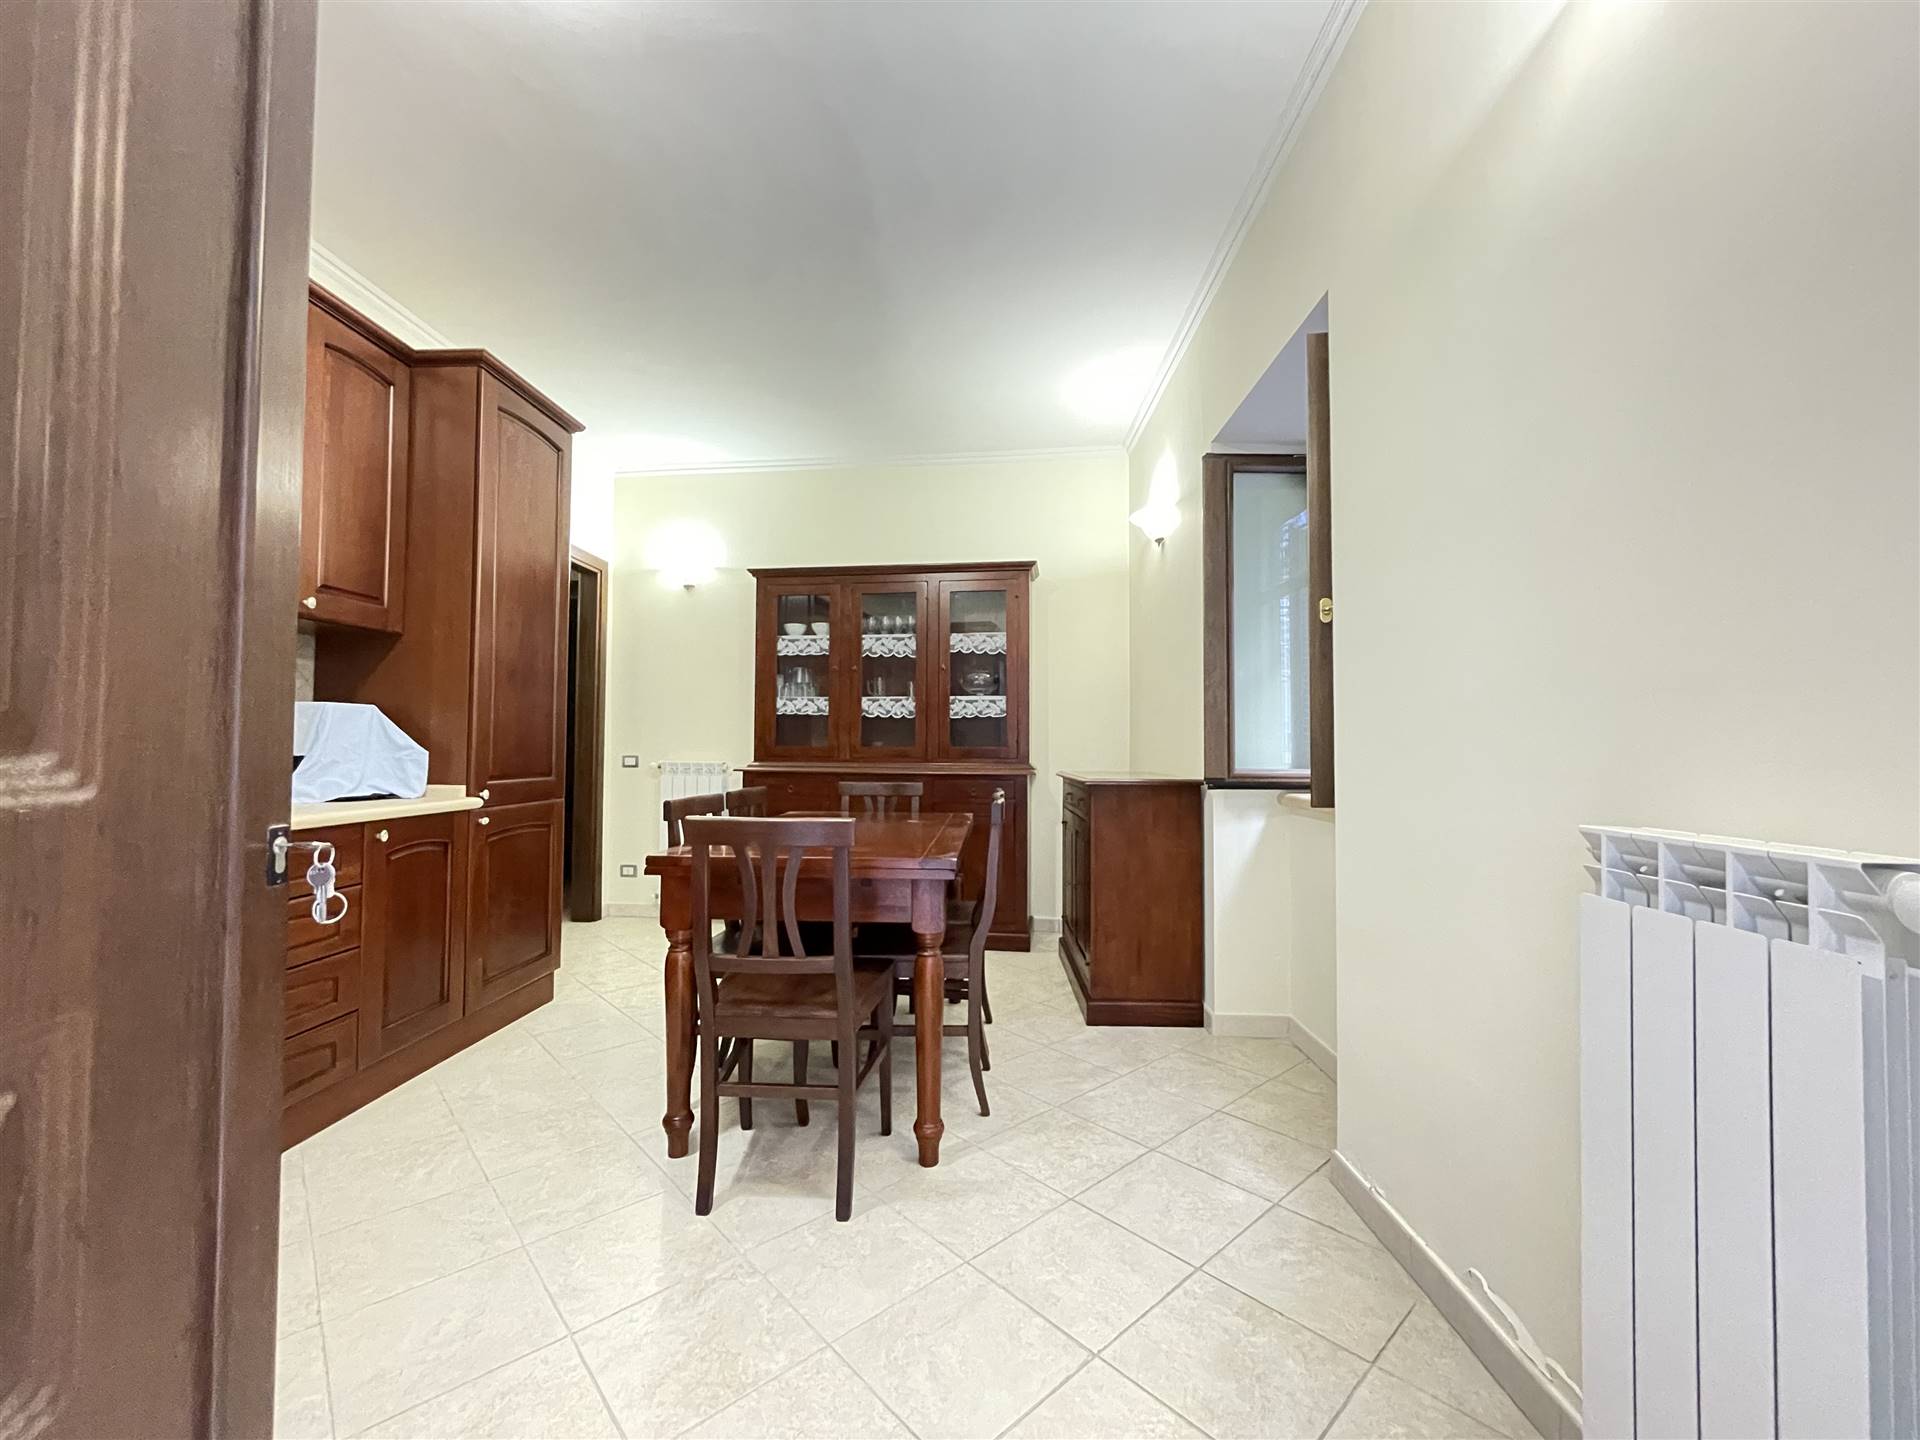 SERMONETA, Detached apartment for sale of 75 Sq. mt., Excellent Condition, Heating Individual heating system, Energetic class: G, placed at Ground, 